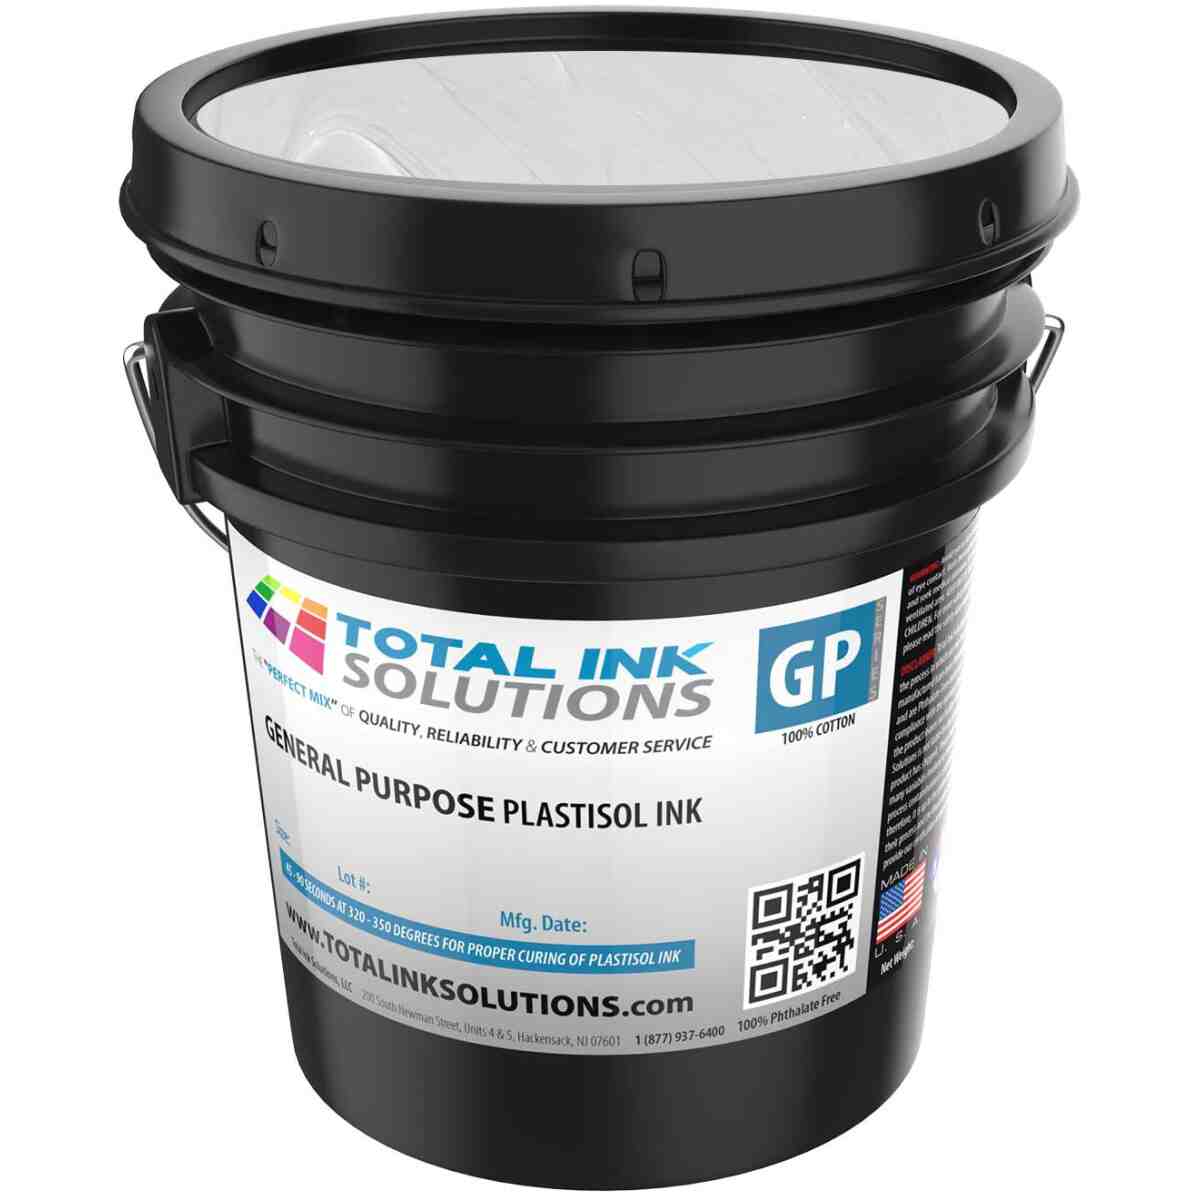 General Purpose Plastisol Ink - Fast Flash White - Gallon TOTAL INK SOLUTIONS®